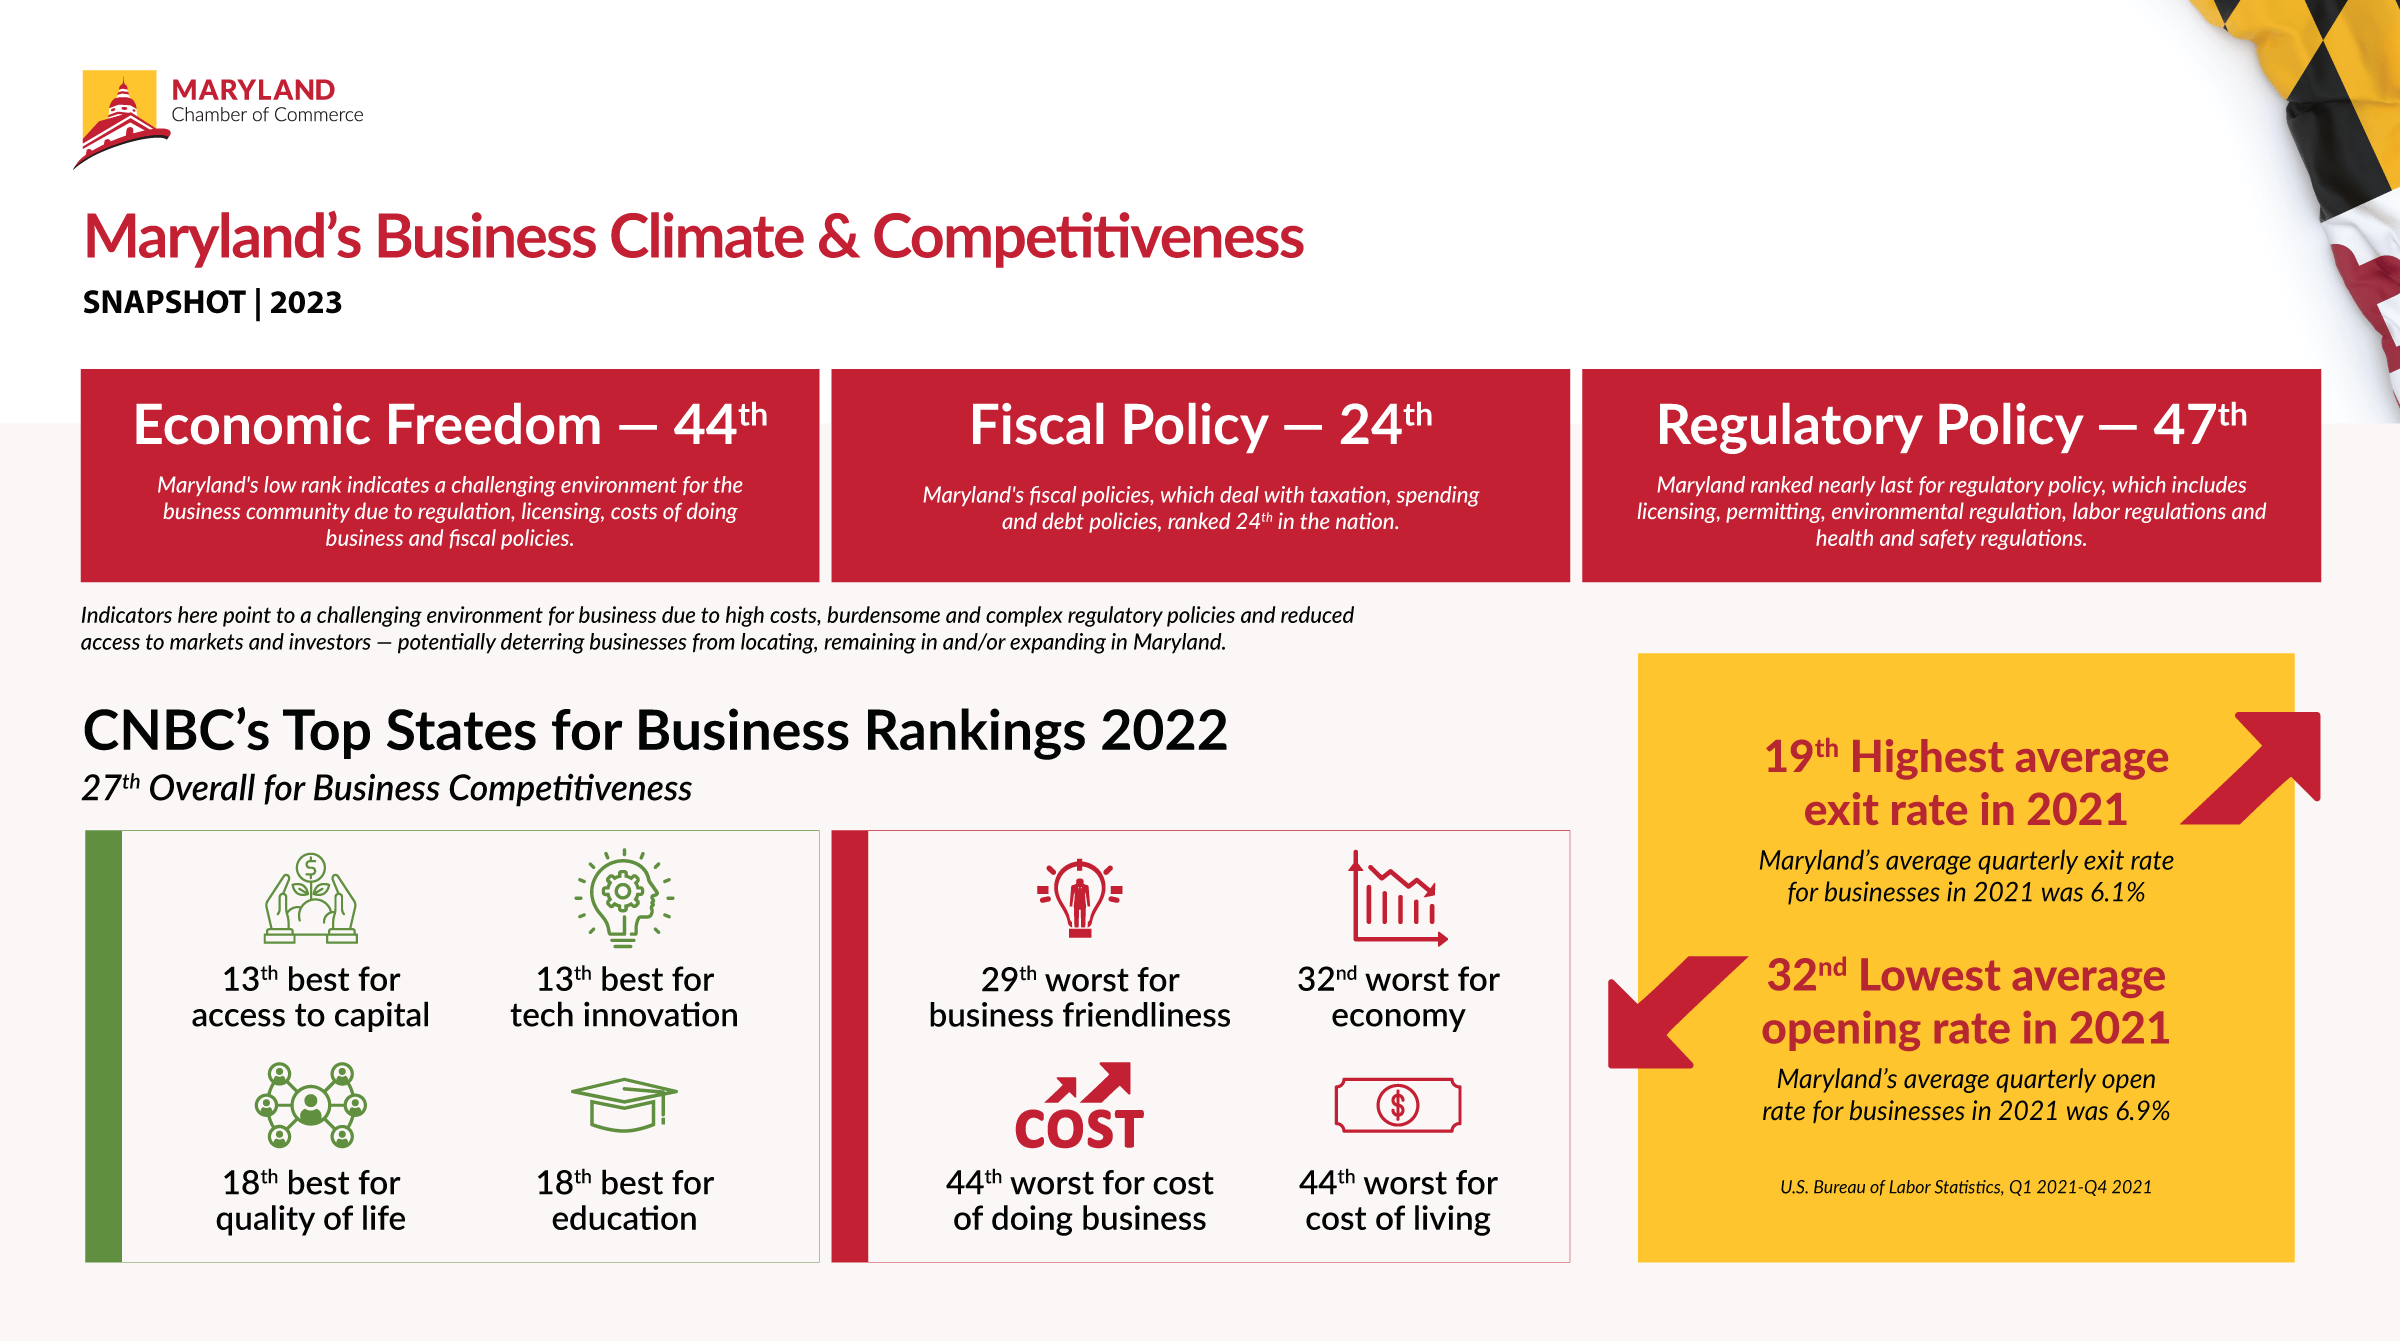 An infographic that demonstrates a variety of rankings regarding Maryland's business climate and competitiveness indicators vs. other states across the nation, including: Maryland is ranked 44th in the nation for Economic Freedom. Maryland's low rank indicates a challenging environment for the business community due to regulation, licensing, costs of doing business and fiscal policies. Maryland is ranked 24th in the nation for Fiscal Policies. Maryland's fiscal policies, which deal with taxation, spending and debt policies, ranked 24th in the nation. Maryland is ranked 47th in the nation for Regulatory Policies. Maryland ranked nearly last for regulatory policy, which includes licensing, permitting, environmental regulation, labor regulations and health and safety regulations. The aforementioned indicators point to a challenging environment for business due to high costs, burdensome and complex regulatory policies and reduced access to markets and investors - potentially deterring businesses from locating, remaining in and/or expanding in Maryland. CNBC's Top States for Business Rankings 2022 ranked Maryland 27th overall for Business Competitiveness. Maryland is ranked 13th best for access to capital, 13th best for tech innovation, 18th best for quality of life and 18th best for education. Maryland is ranked 29th worst for business friendliness, 32nd worst for economy, 44th worst for cost of doing business, and 44th worst for cost of living. Maryland was ranked as having the 19th highest average exit rate for businesses in 2021. Maryland's average quarterly exit rate for business in 2021 was 6.1%. Maryland was ranked as having the 32nd lowest average opening rate for businesses in 2021. Maryland's average quarterly open rate for businesses in 2021 was 6.9%.